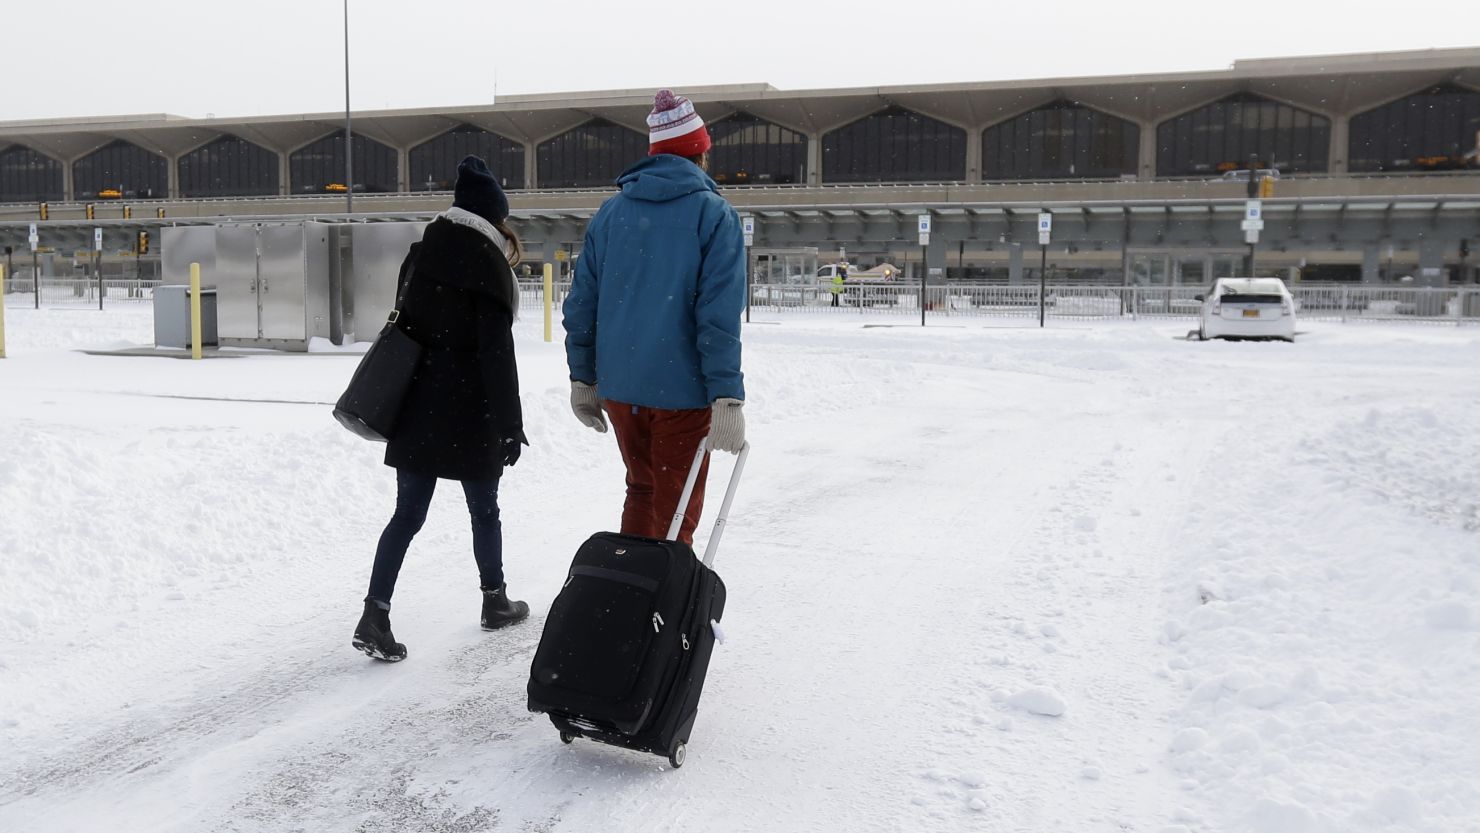 Travelers walk across a snow-covered parking lot at Newark Liberty International Airport on Friday.